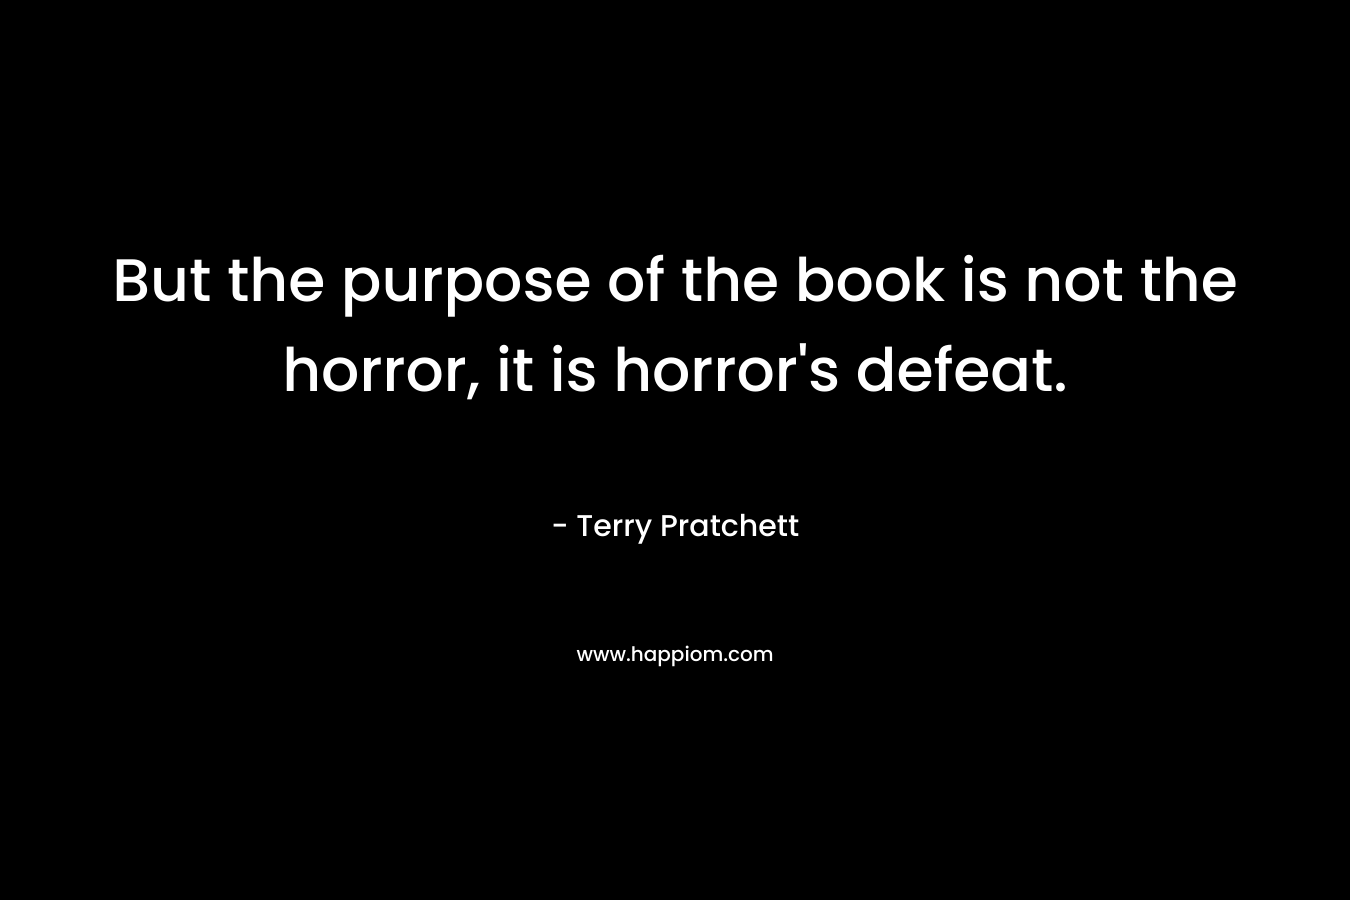 But the purpose of the book is not the horror, it is horror's defeat.